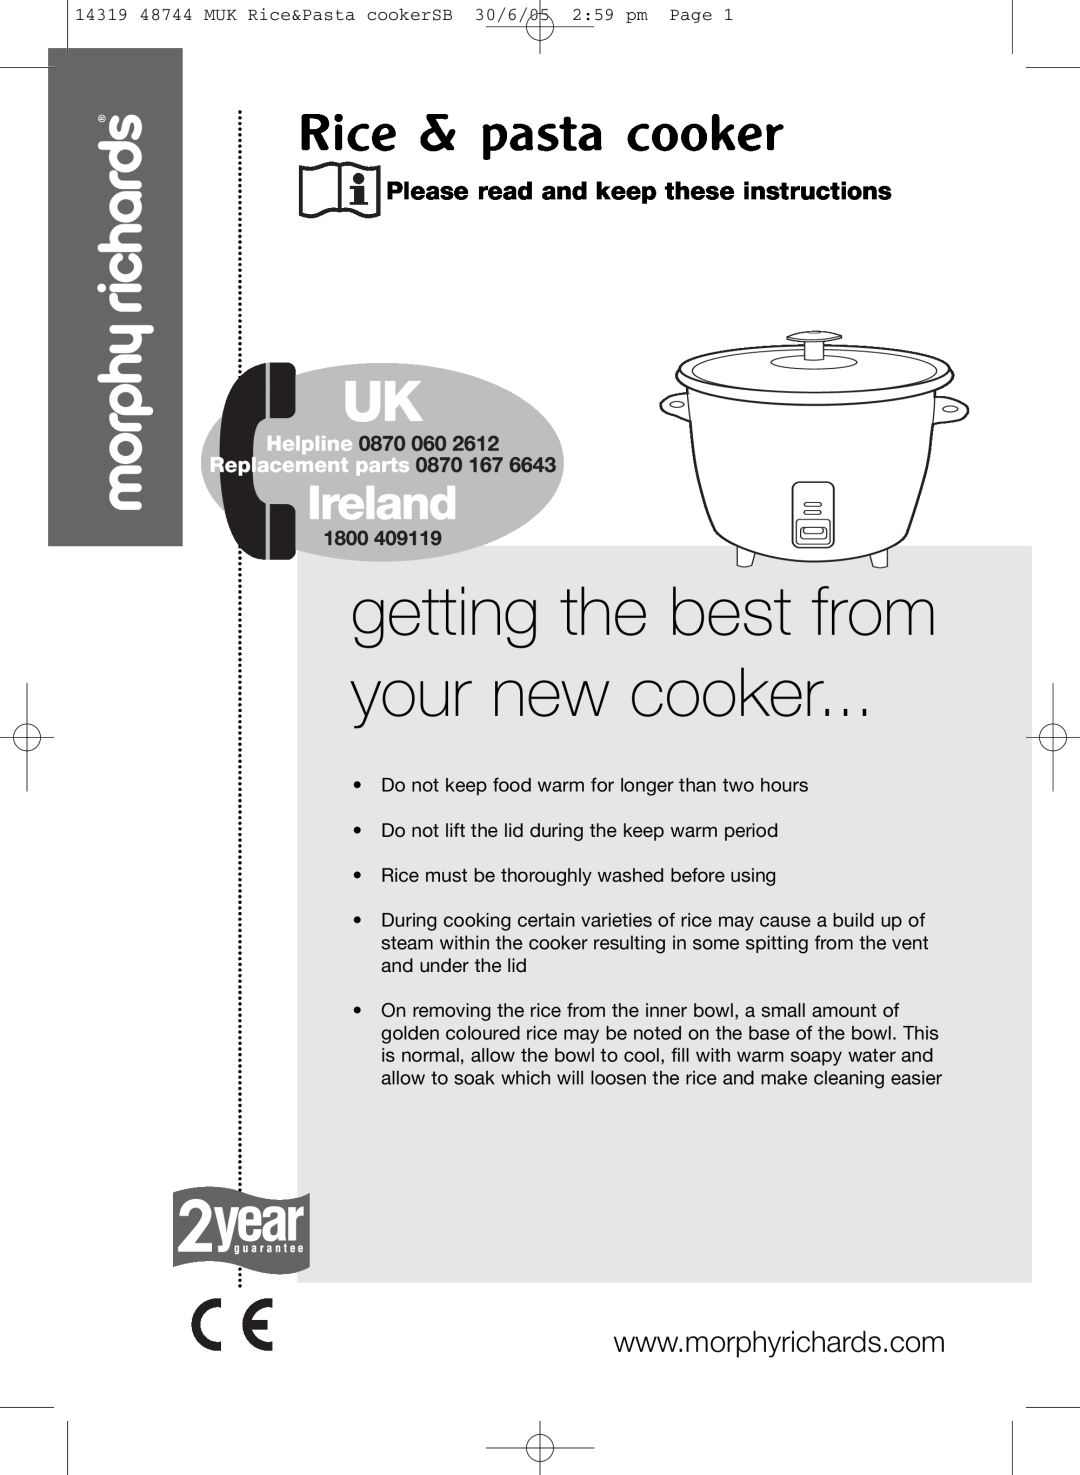 Morphy Richards manual getting the best from your new cooker, Rice & pasta cooker 